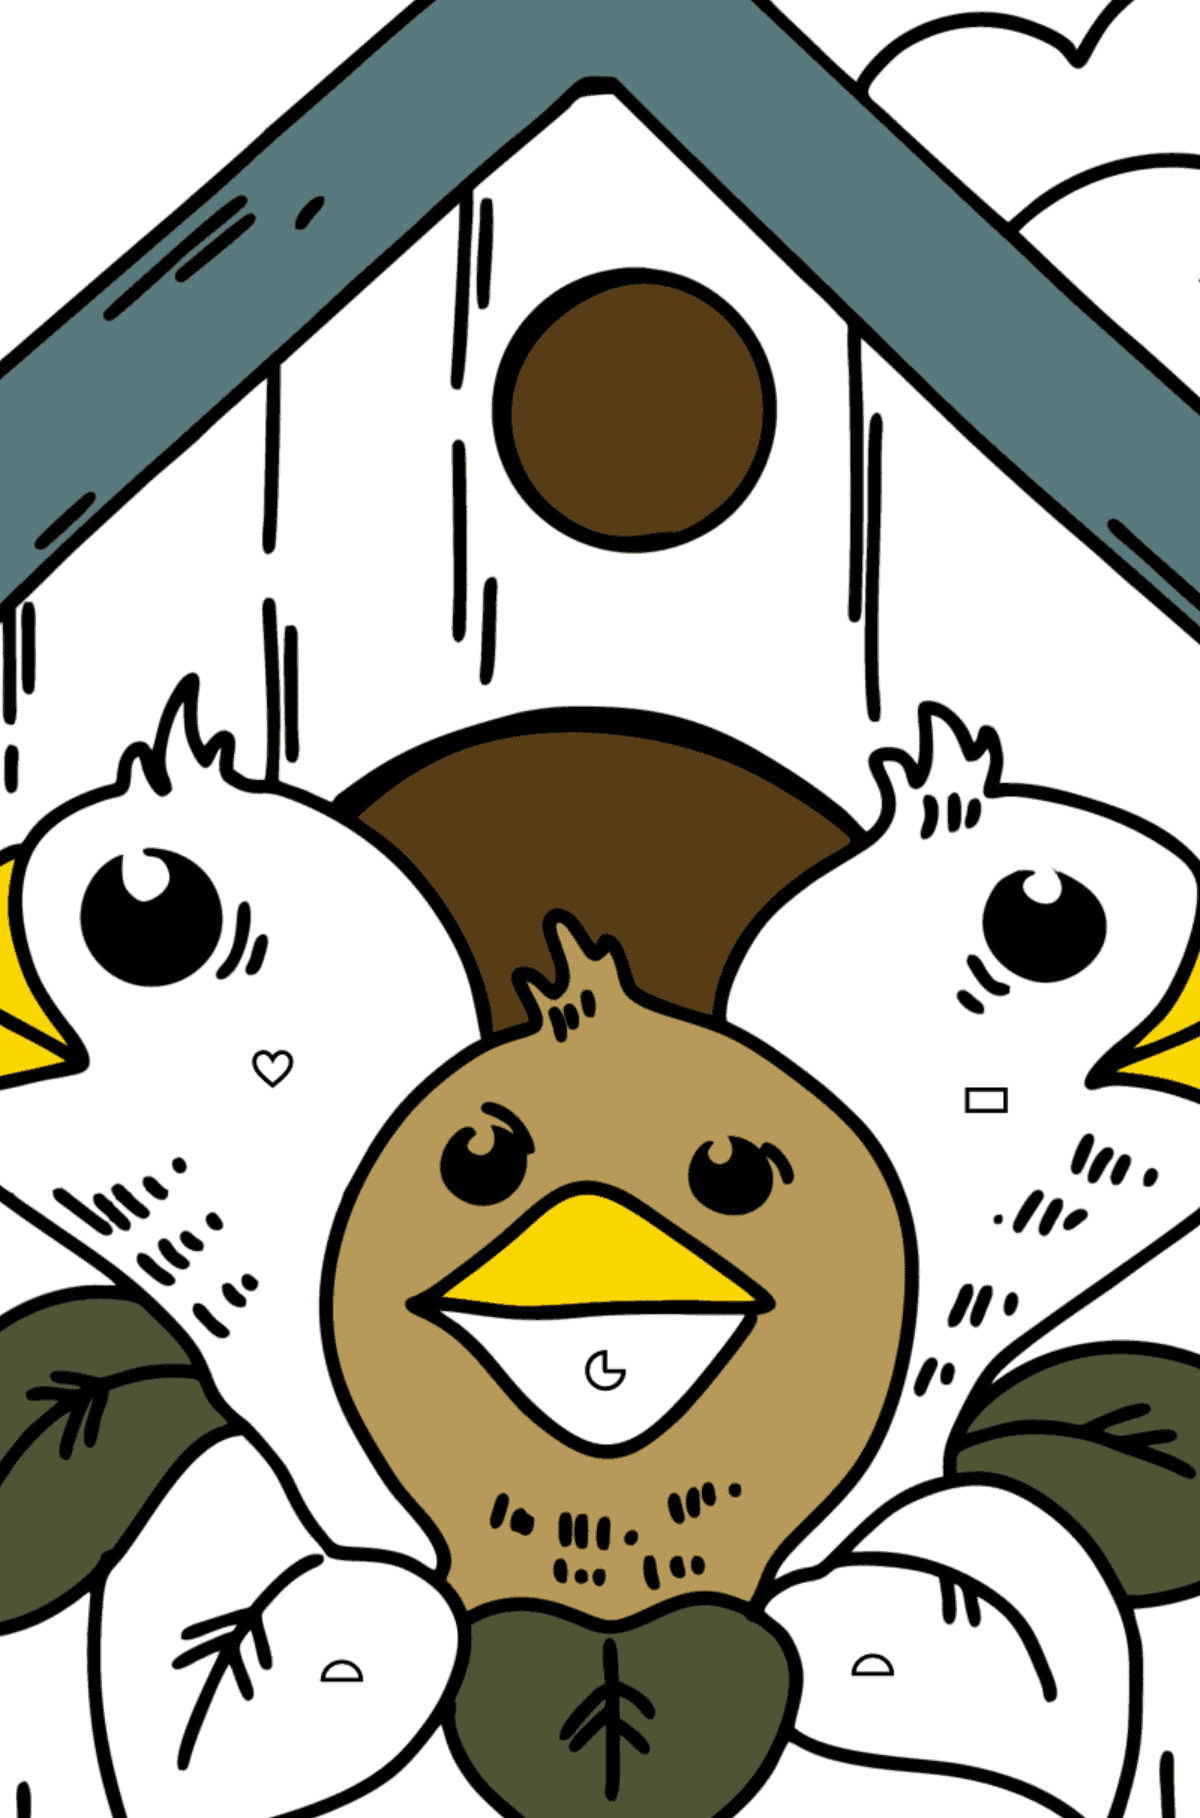 Chicks in a Birdhouse coloring page - Coloring by Geometric Shapes for Kids